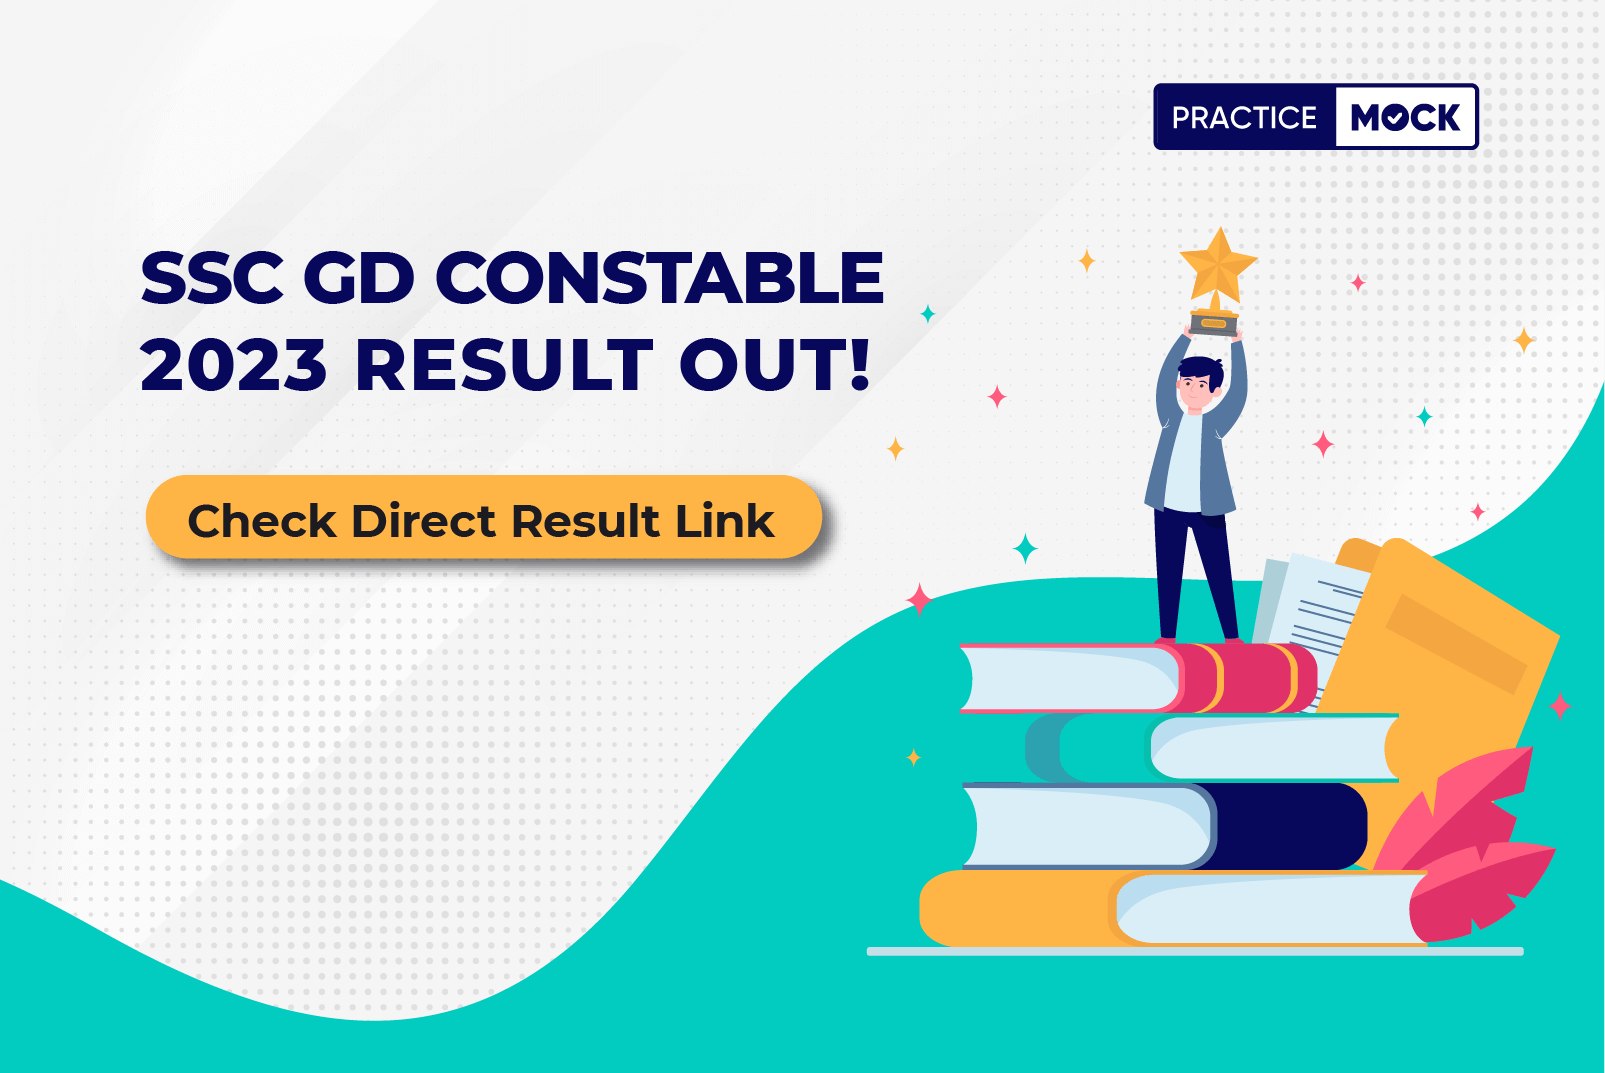 SSC GD Result 2023, Check SSC GD Constable Direct Result Link